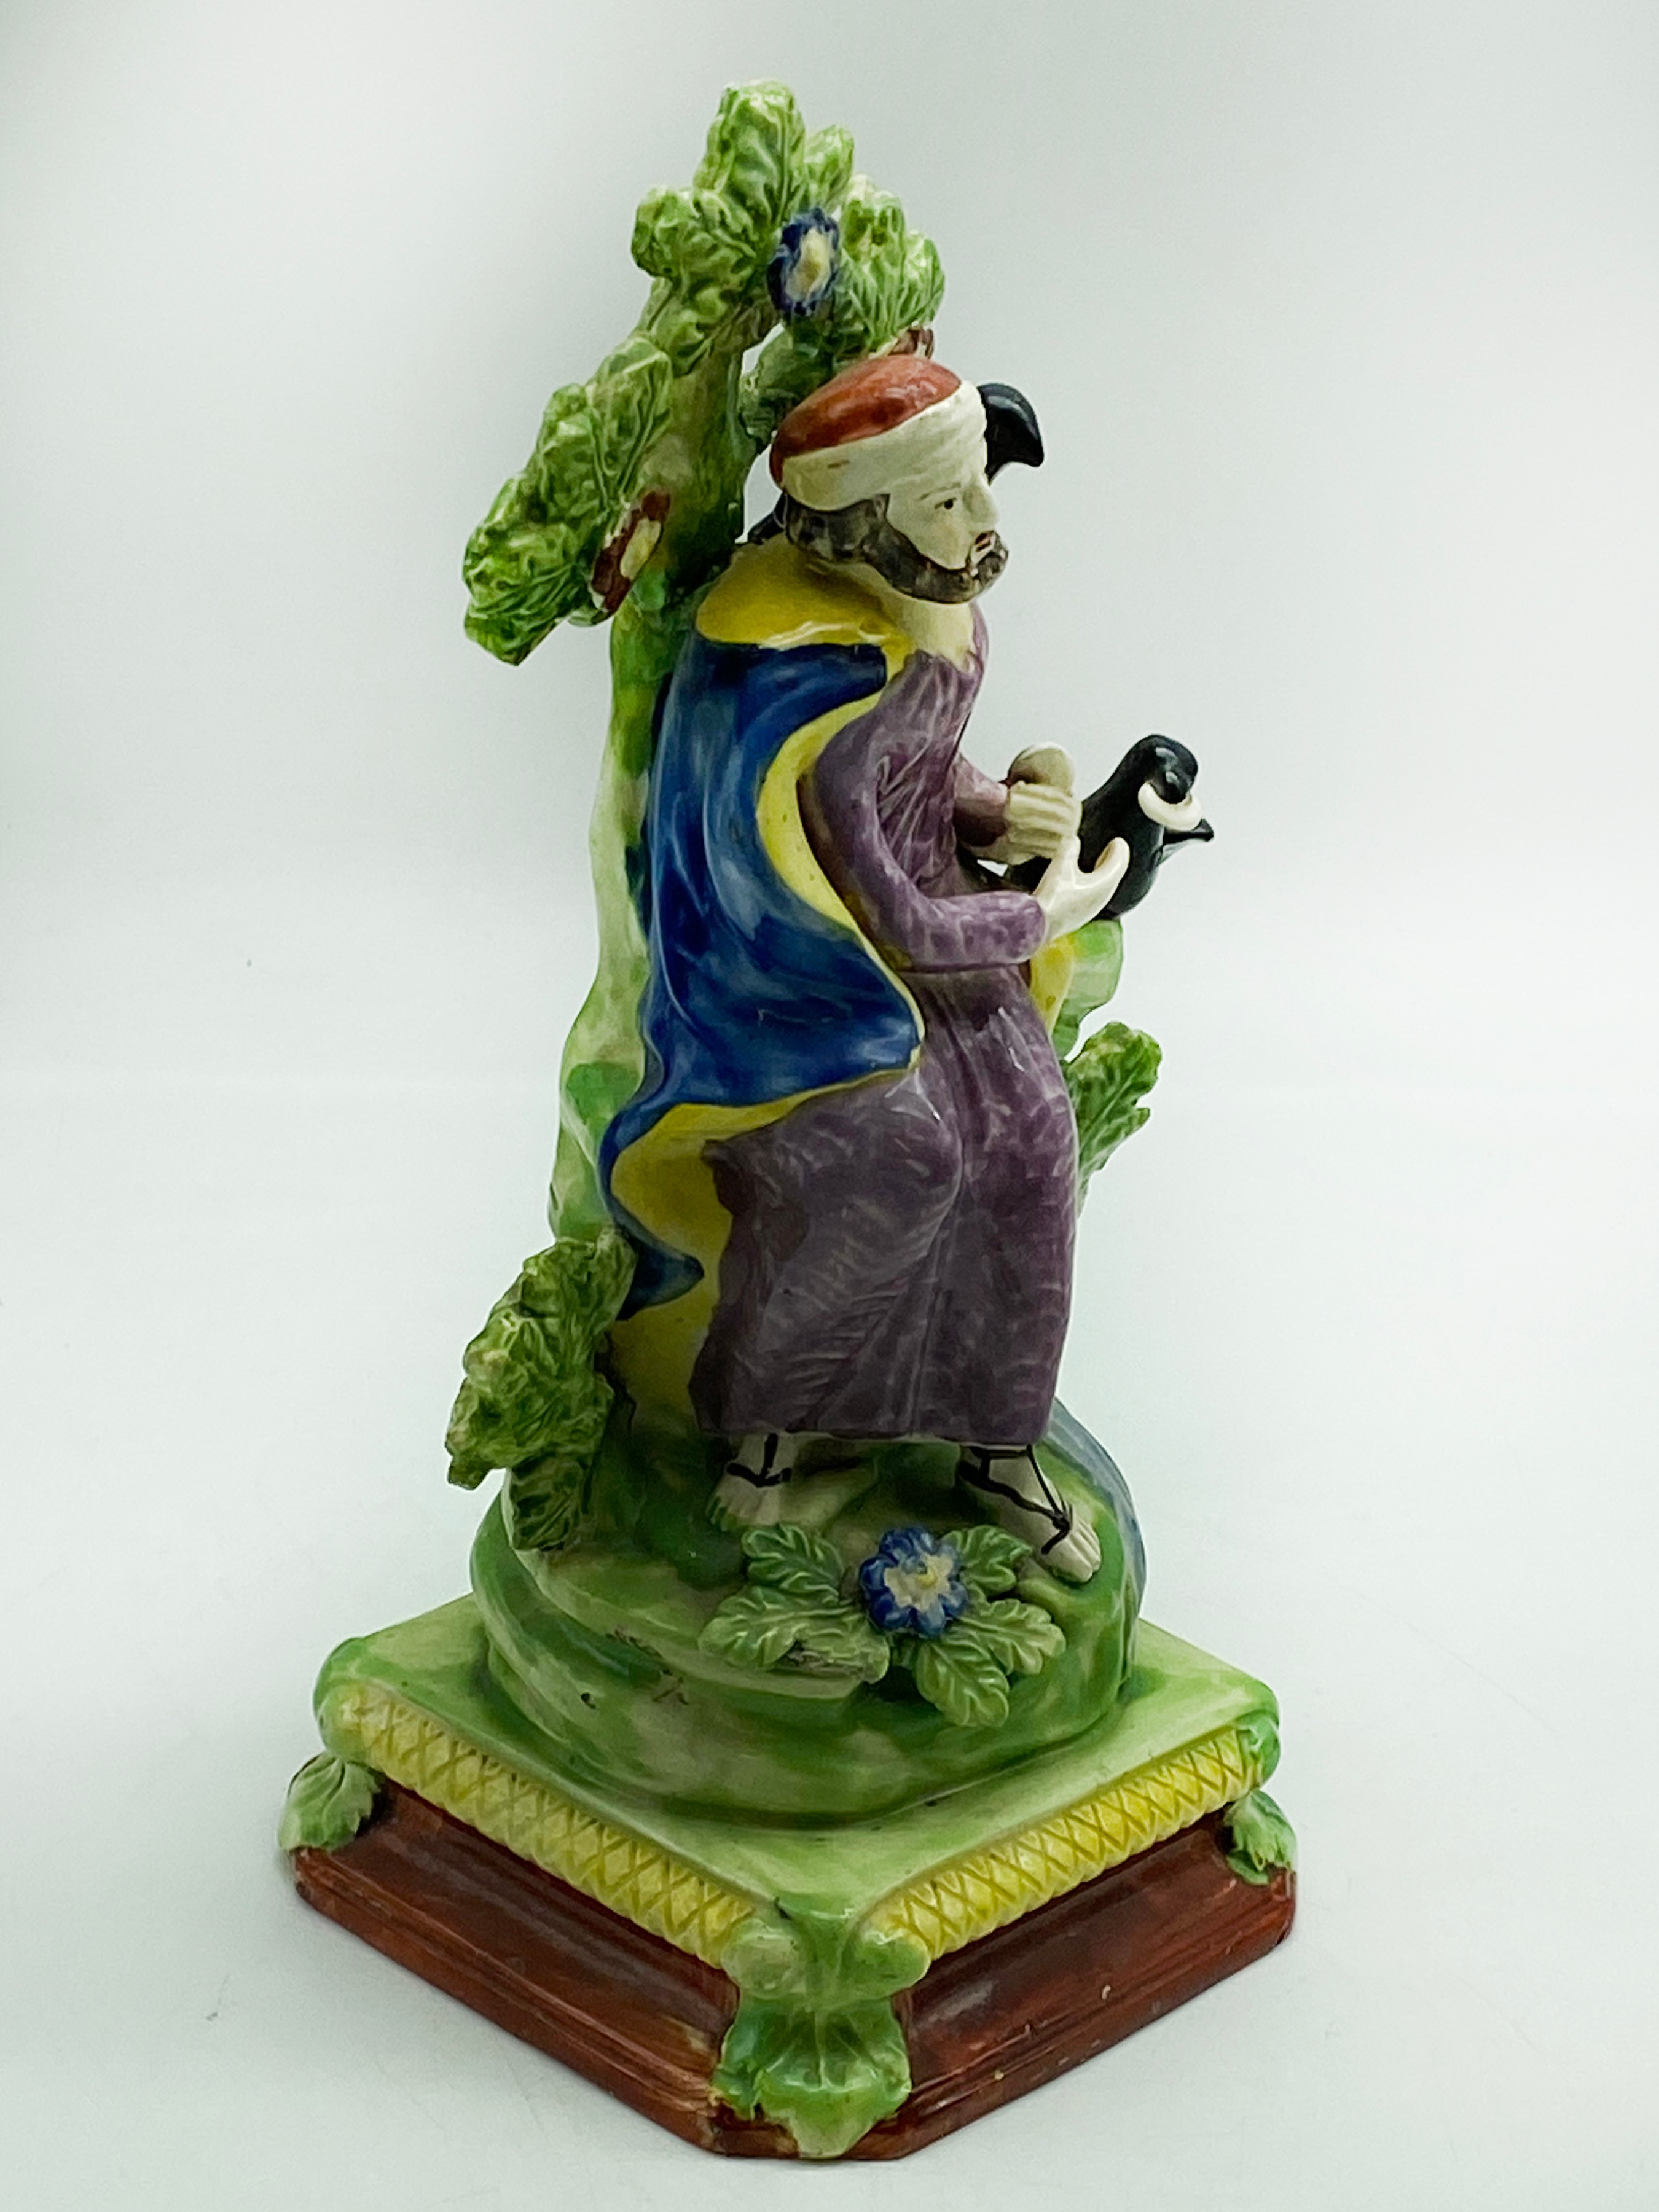 A STAFFORDSHIRE CERAMIC FIGURE DEPICTING THE PROPHET ELIJAH IN THE WILDERNESS BEING FED BY RAVENS. - Image 2 of 7